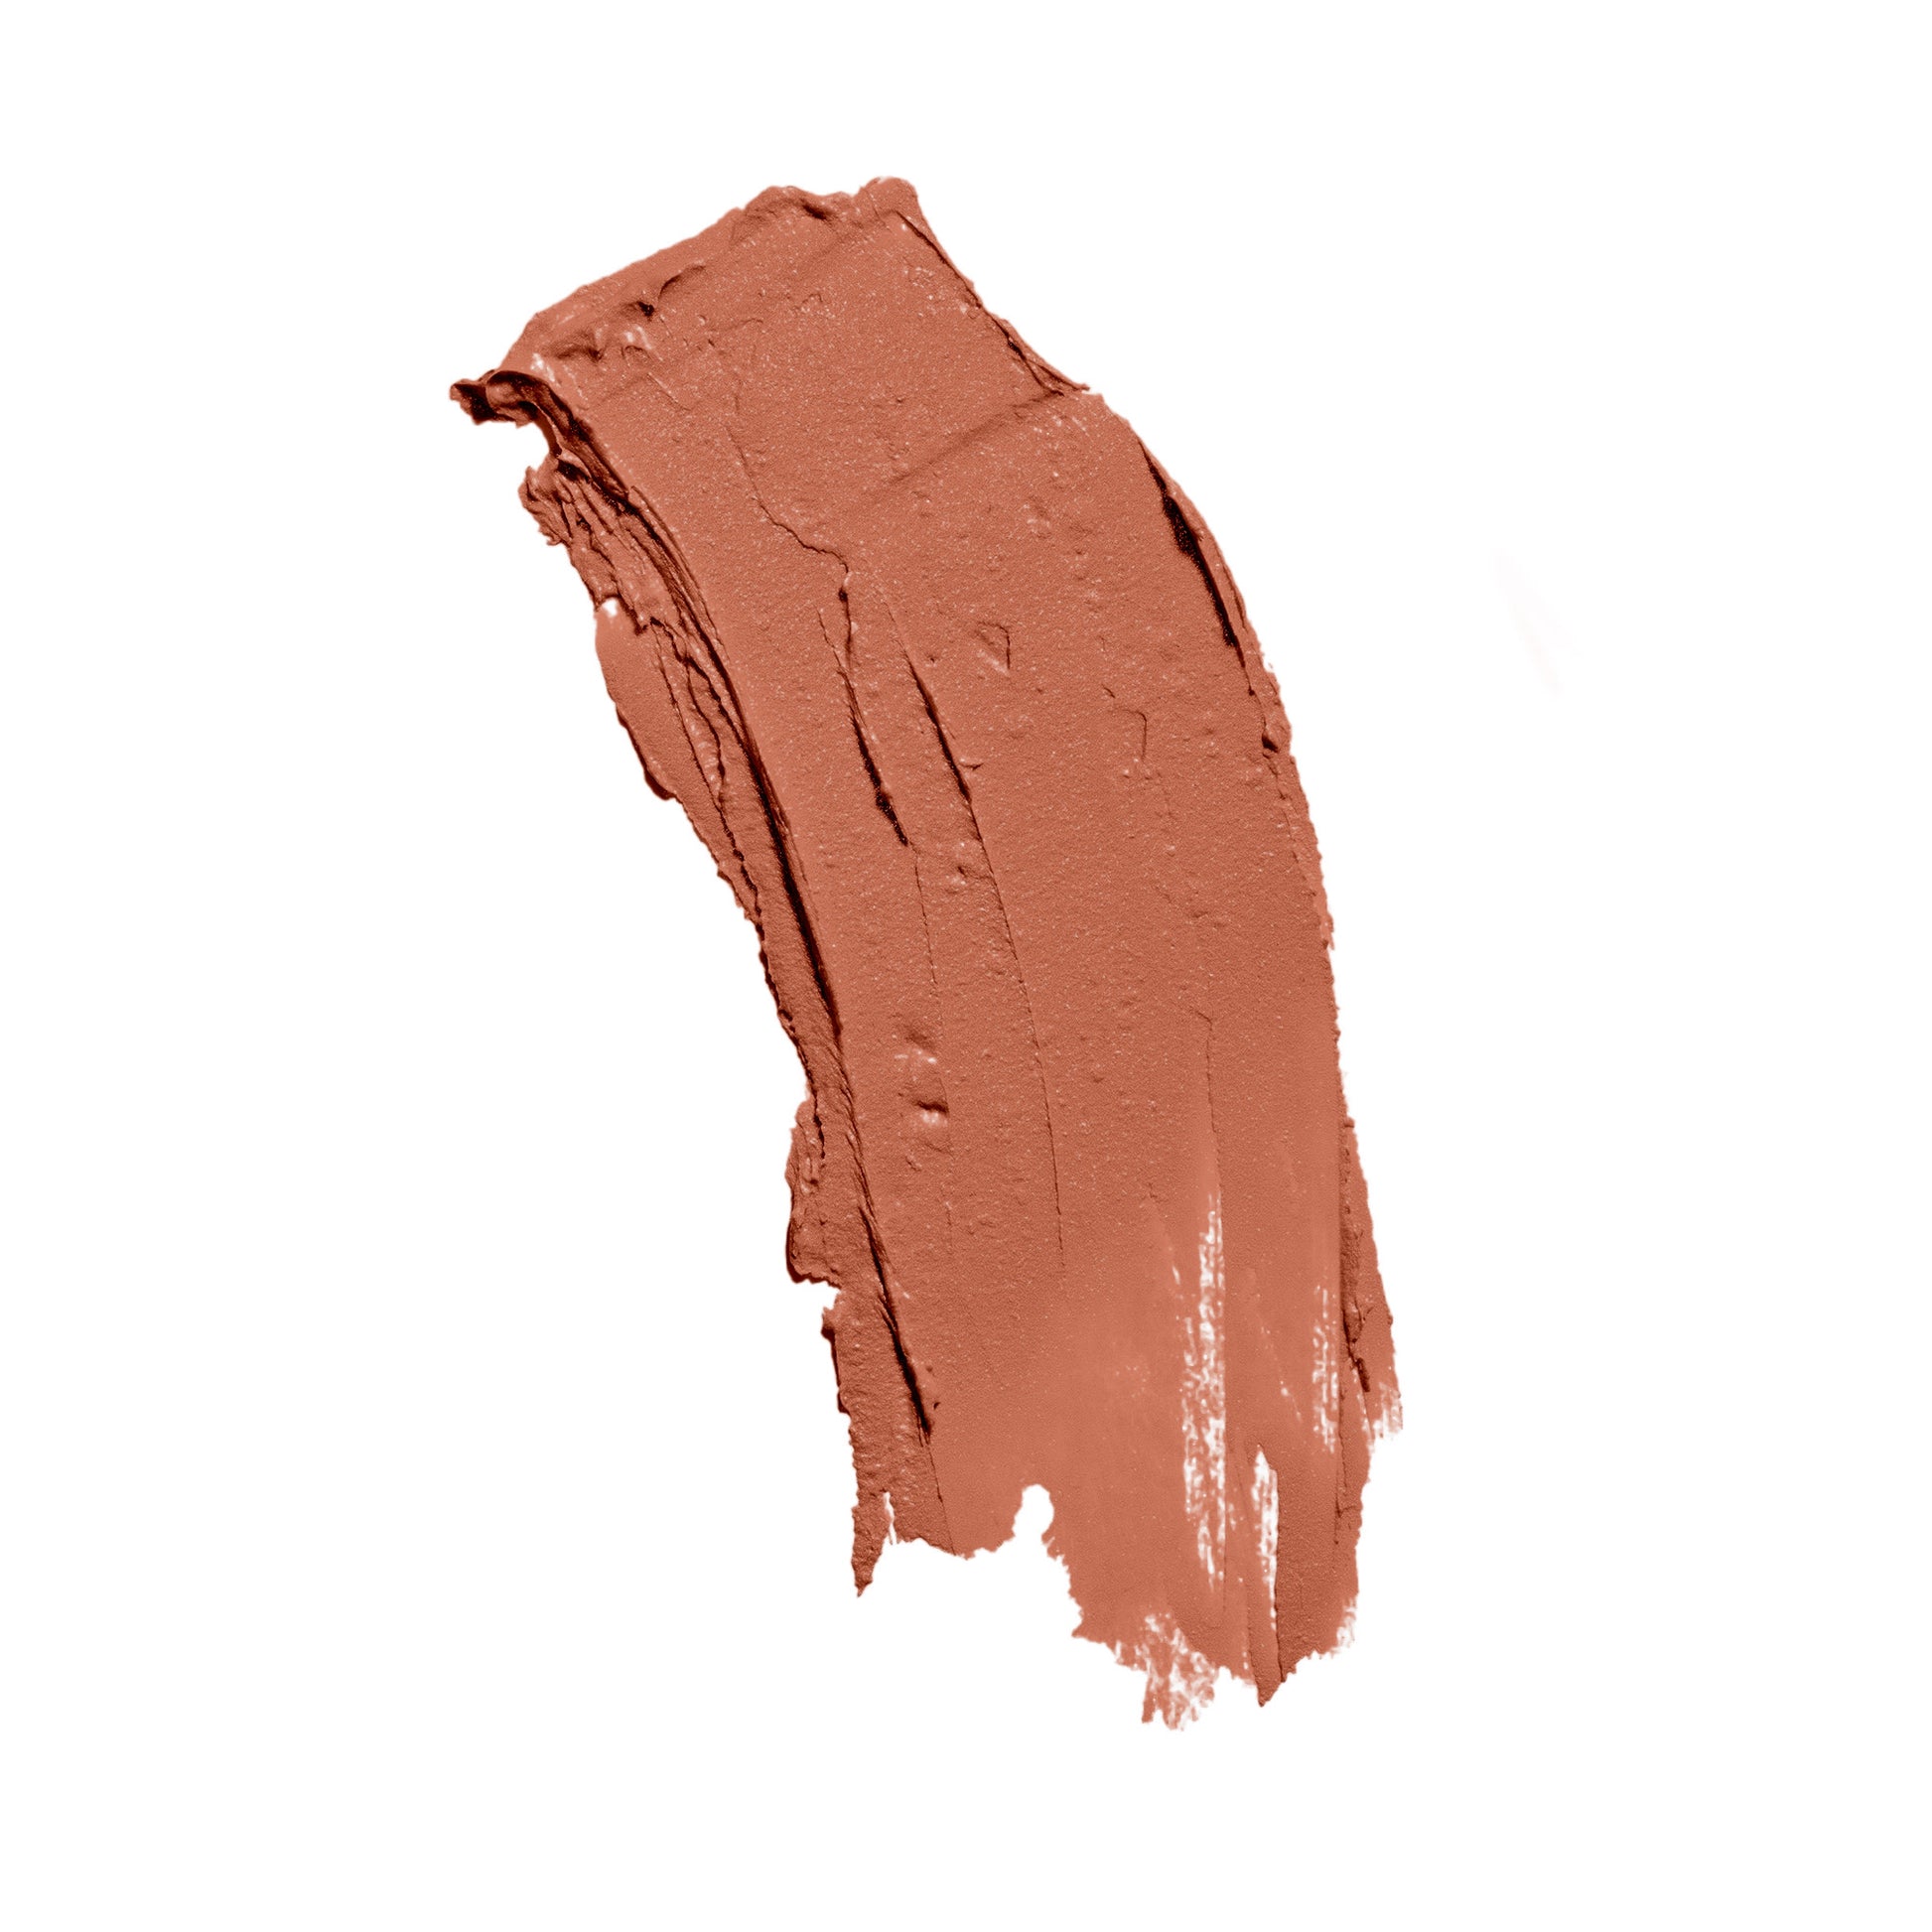 Satin lipstick with a pure brown hue swatched on a white surface